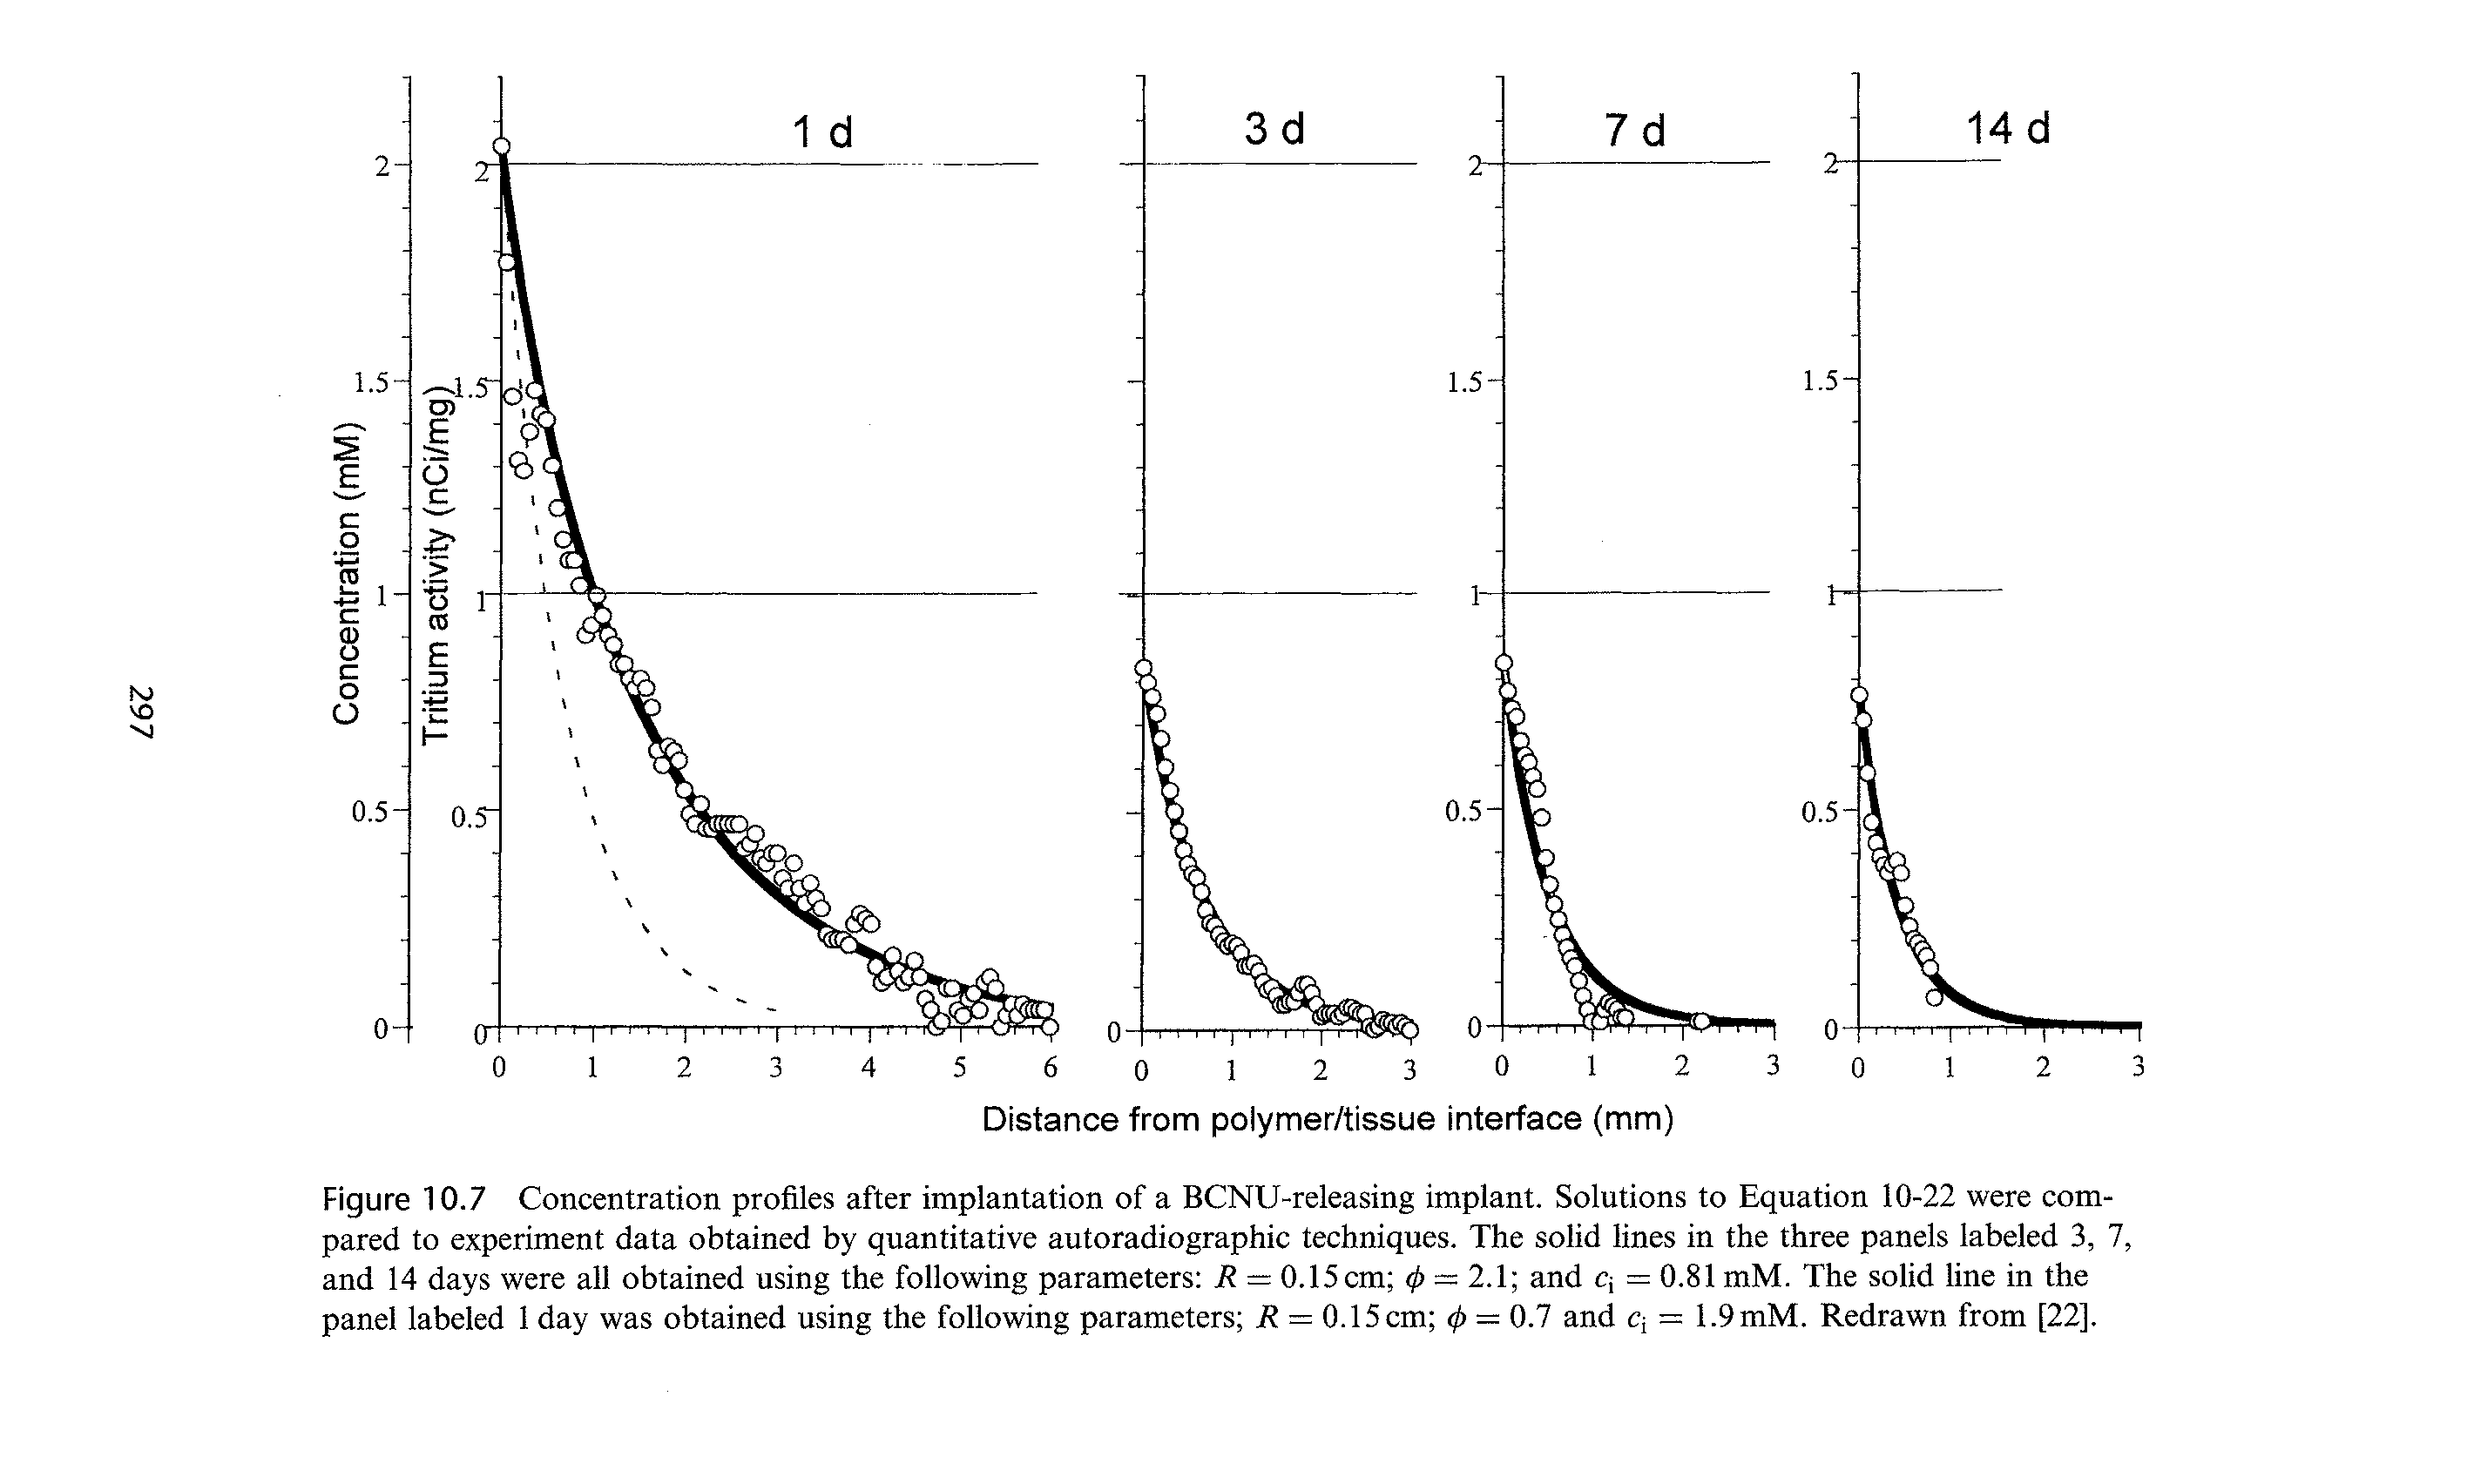 Figure 10.7 Concentration profiles after implantation of a BCNU-releasing implant. Solutions to Equation 10-22 were compared to experiment data obtained by quantitative autoradiographic techniques. The solid lines in the three panels labeled 3, 7, and 14 days were all obtained using the following parameters i = 0.15 cm — 2.1 and q = 0.81 mM. The solid line in the panel labeled 1 day was obtained using the following parameters R = 0.15 cm (j) = 0.7 and q = 1.9 mM. Redrawn from [22].